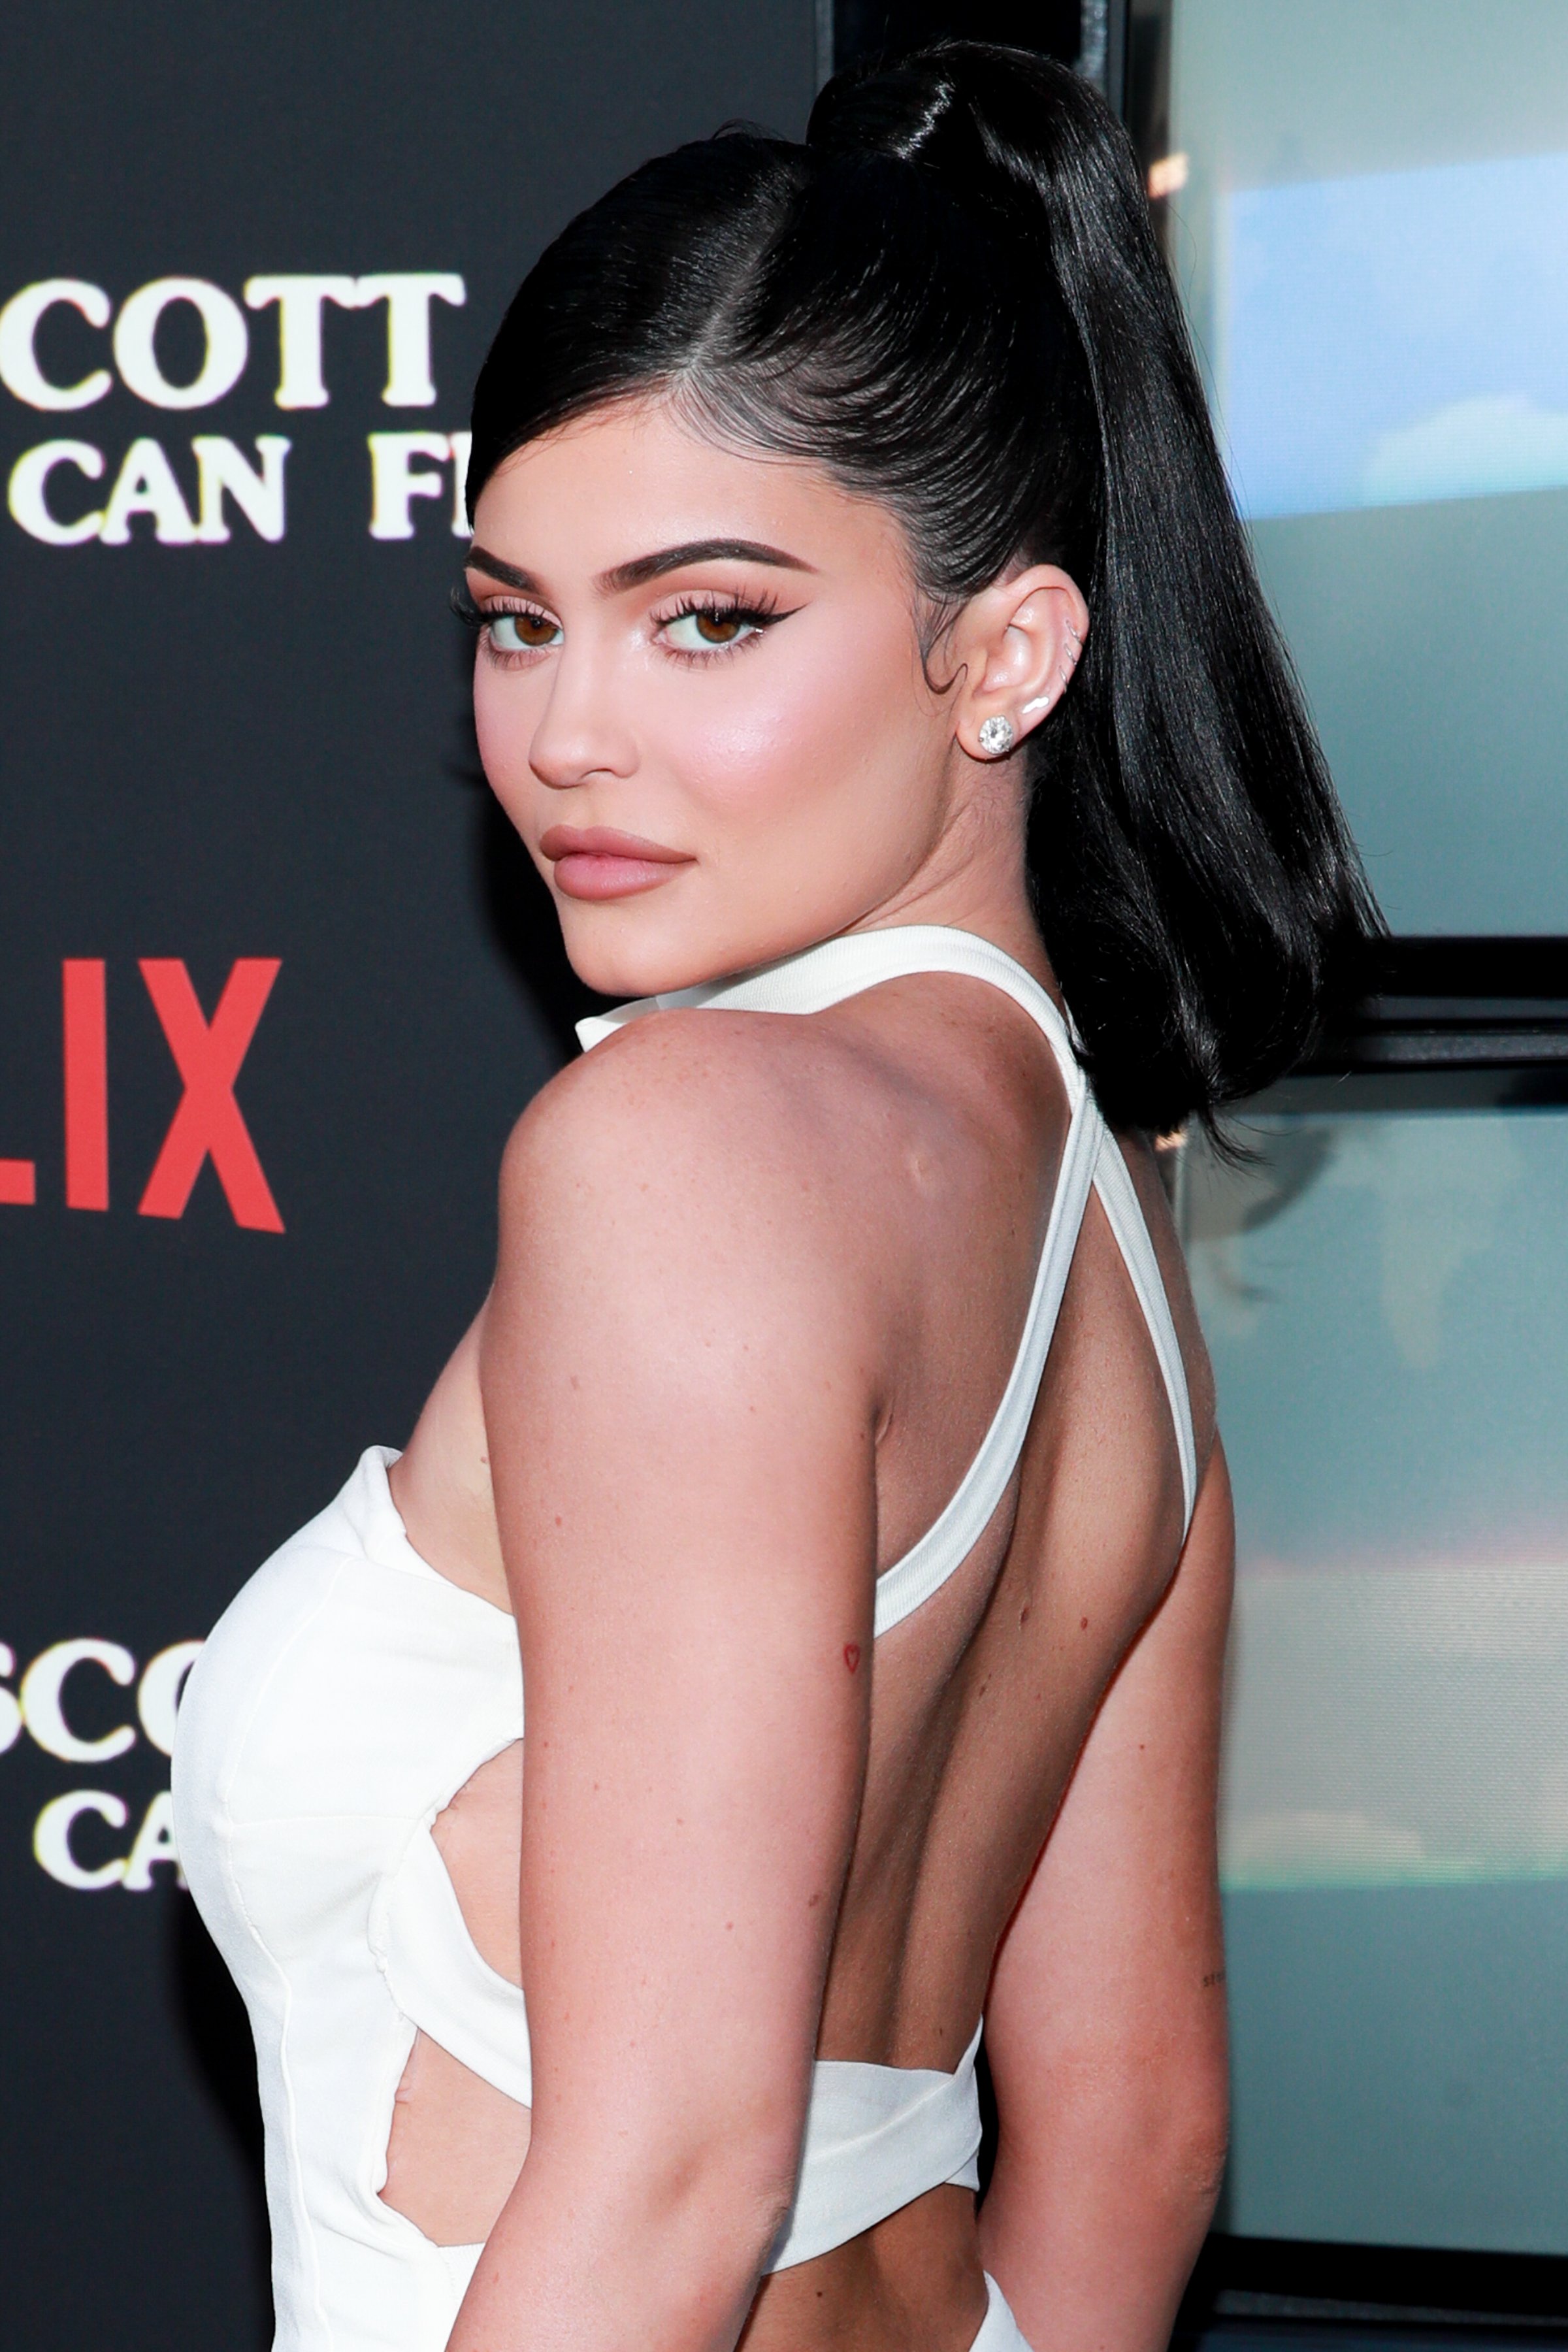 Kylie Jenner at the premiere of Travis Scott's Netflix documentary, "Travis Scott: Look Mom I Can Fly" in August 2019. | Photo: Getty Images